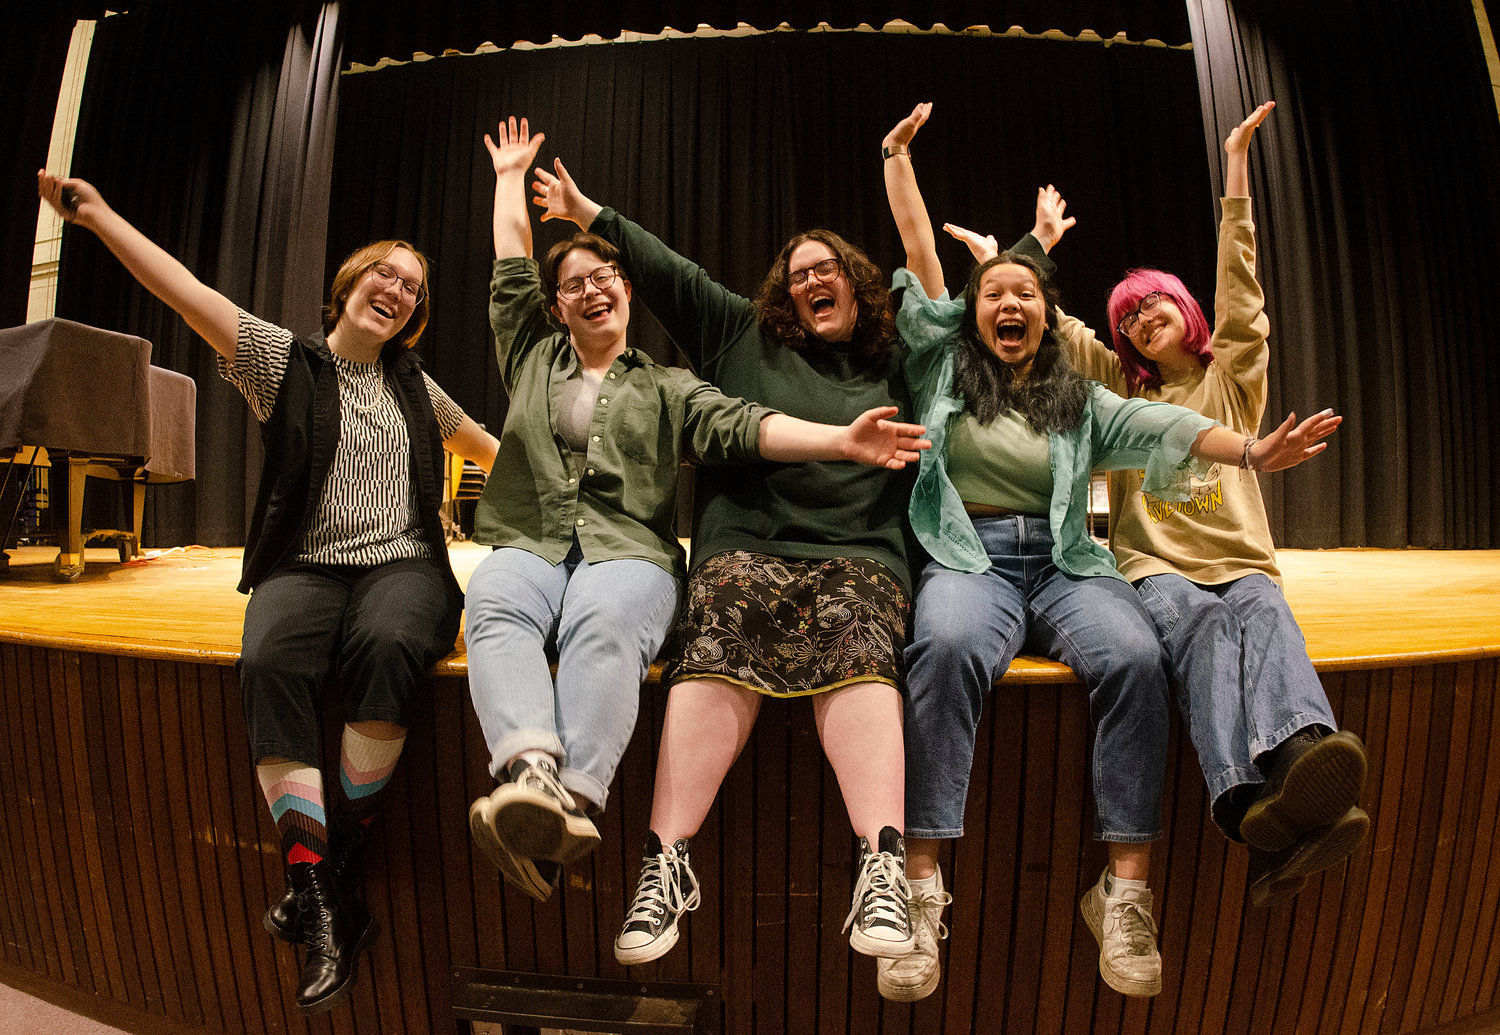 Tiverton High School students (from left) Ava Milukas, Ellie Flanagan, Casey Michaels, Julia Han and Emma Baker, who also wrote the play, will premiere "White Noise" Saturday evening.